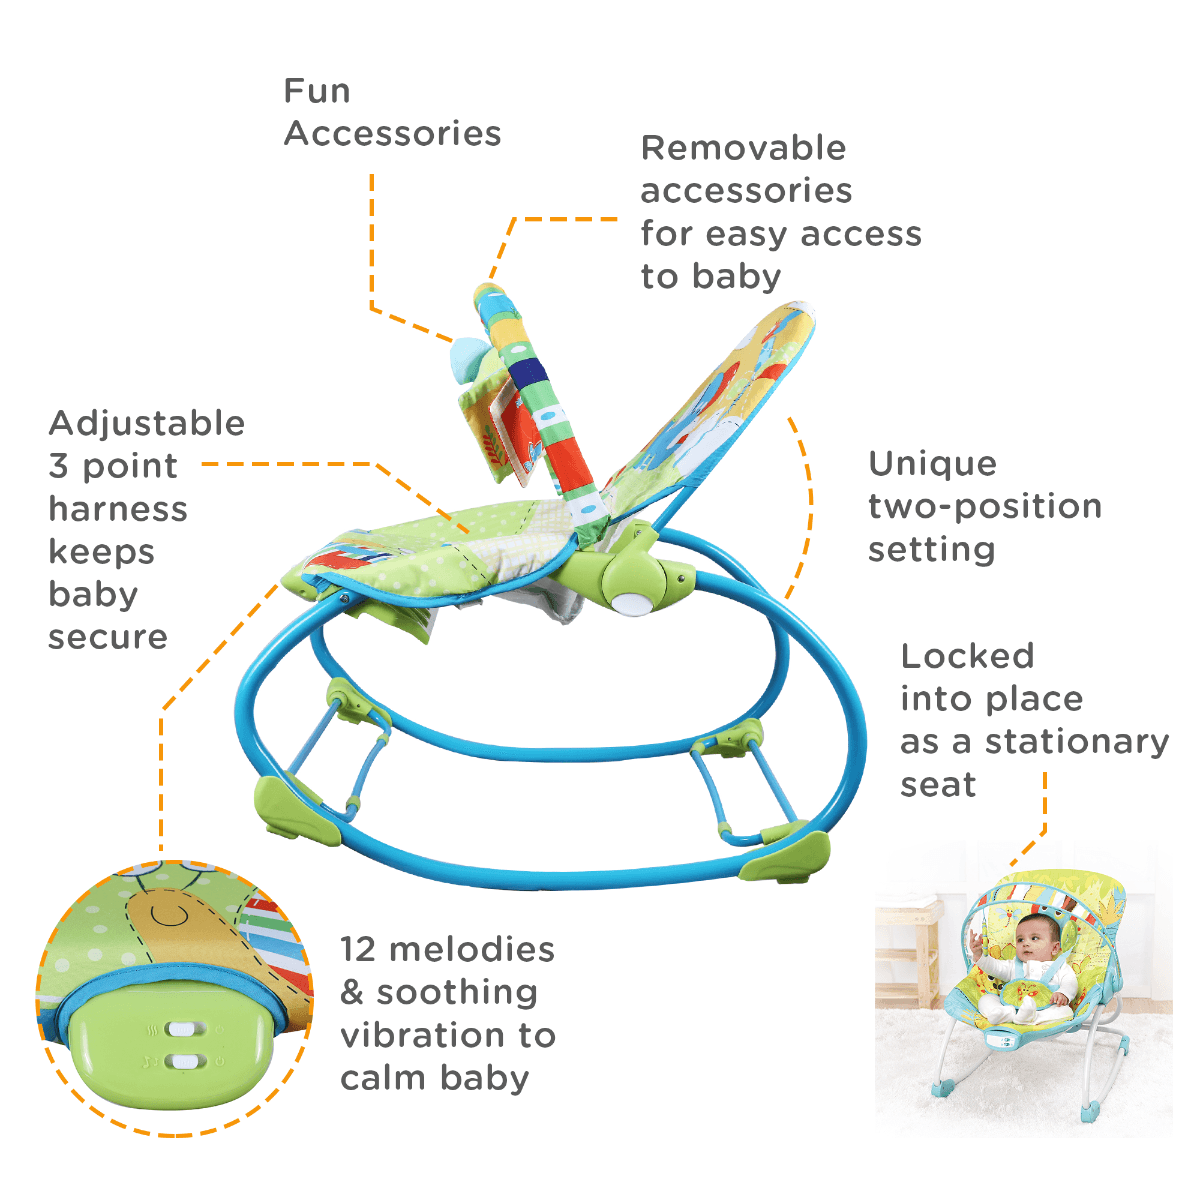 Mastela Baby Rocker Green - For Ages 0-3 Years